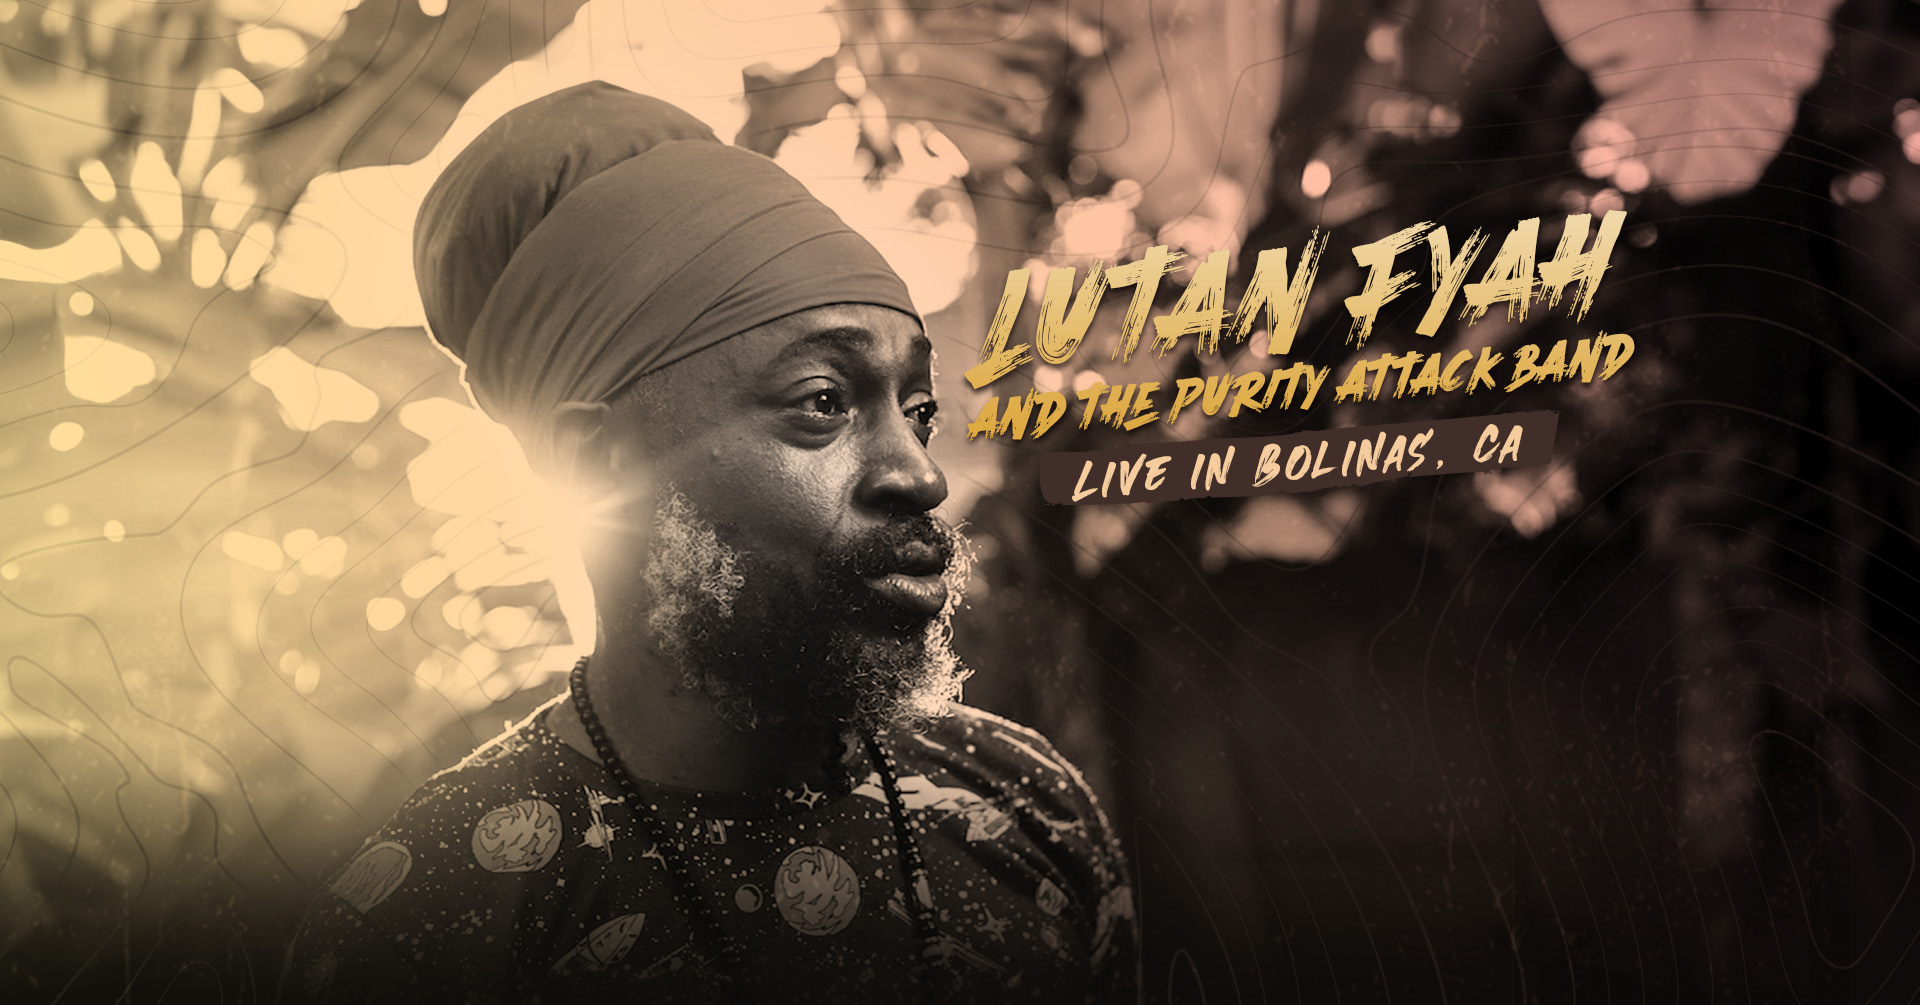 Lutan Fyah and the Purity Attack Band live In Bolinas